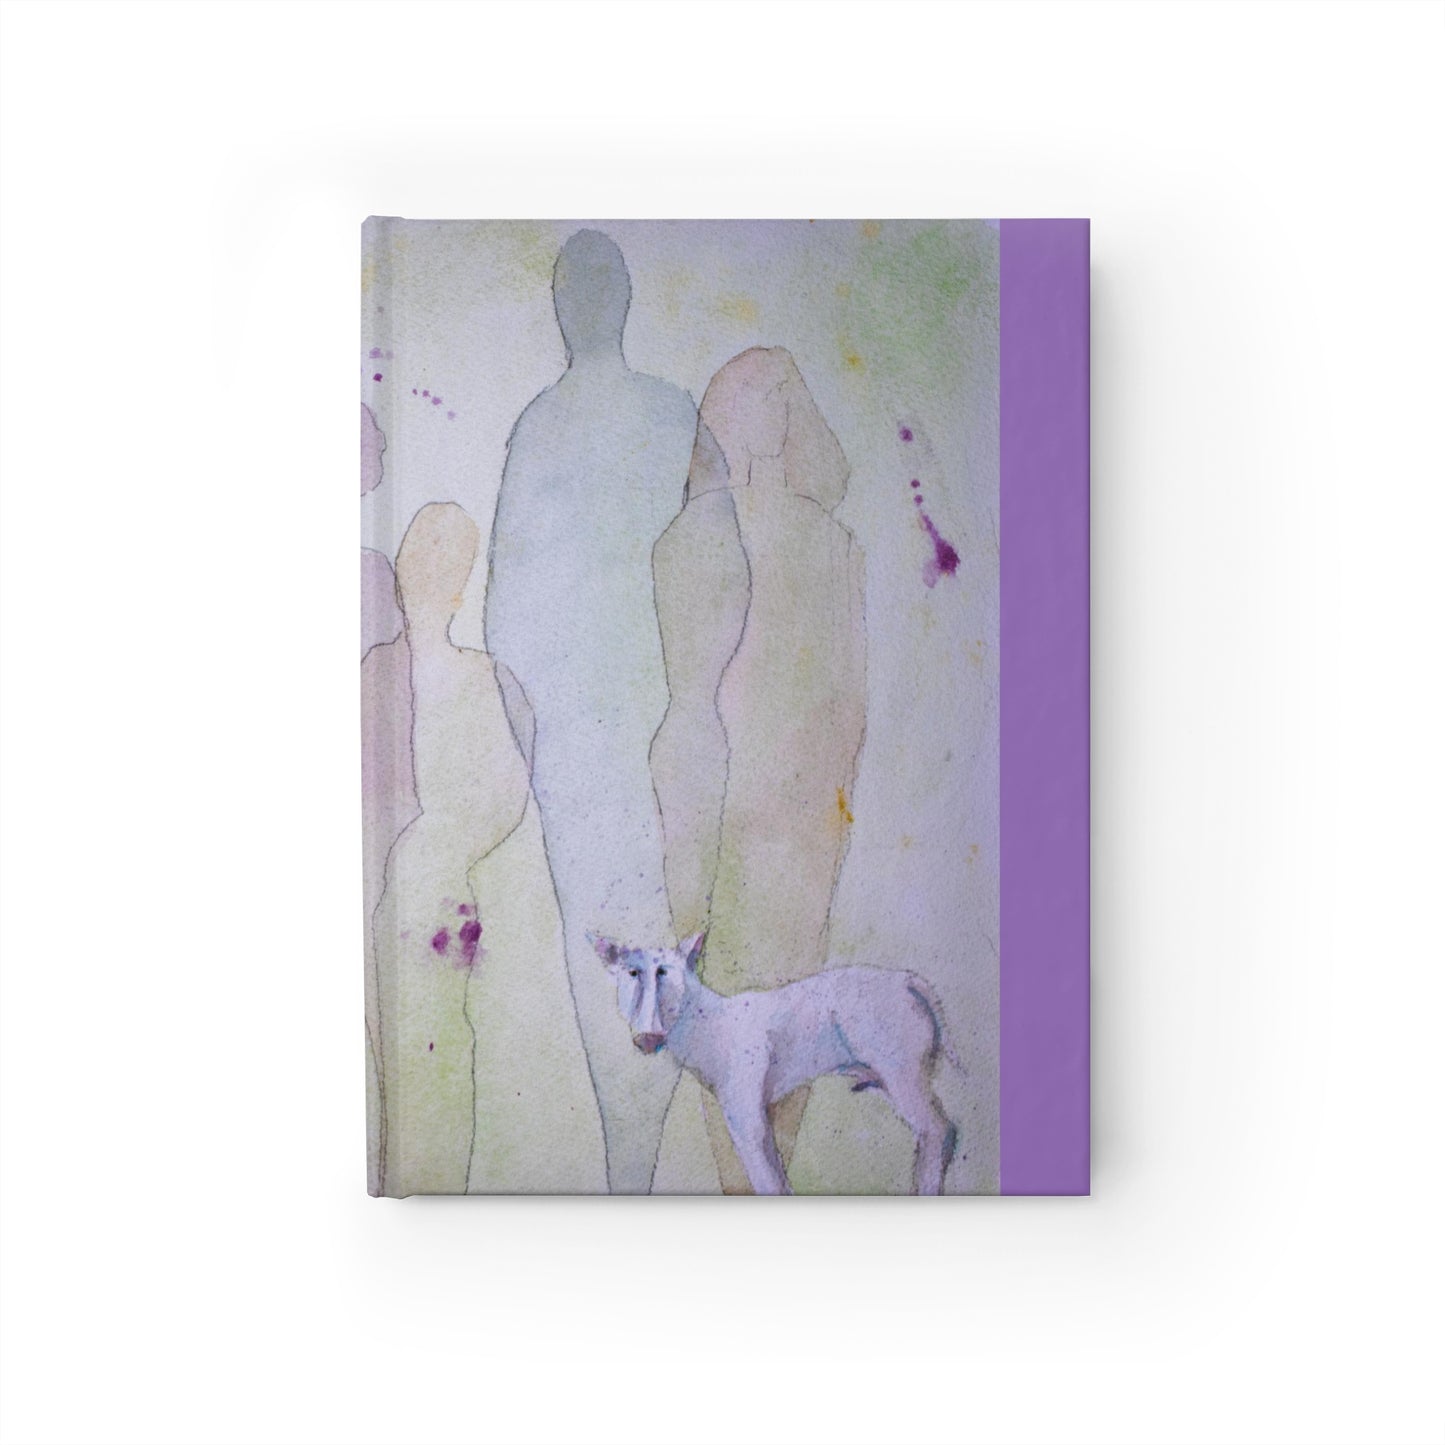 Shadows of Love, Watercolor Journal/Notebook - J. Wesley Bailey IV Inspired, 128 Blank Pages, Artistic Sketch & Writing Diary, Hardcover